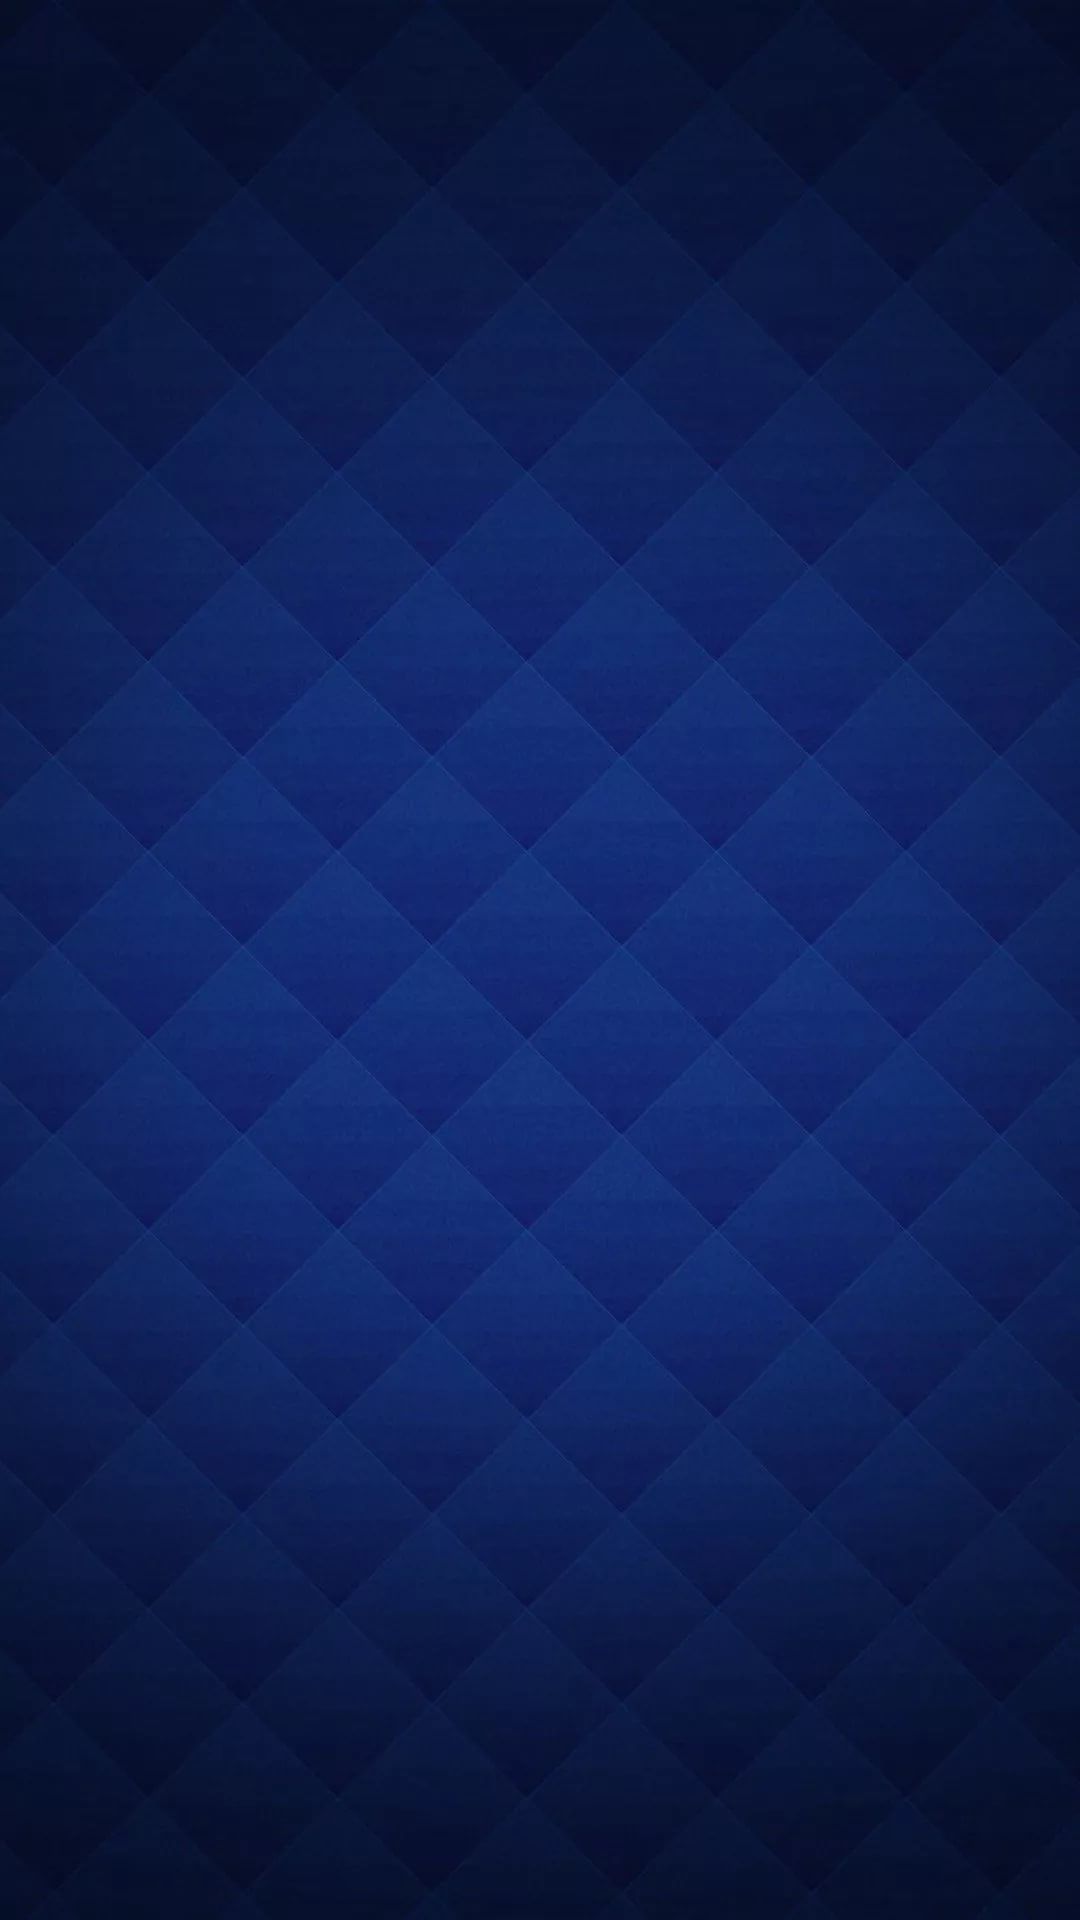 Blue Pattern iPhone 8 Wallpaper with high-resolution 1080x1920 pixel. You can use this wallpaper for your iPhone 8, iPhone 8 Plus, iPhone X, XS, XS Max, XR, 11, 11 Pro, 11 Pro Max home screen, lock screen or any other… - Dark blue